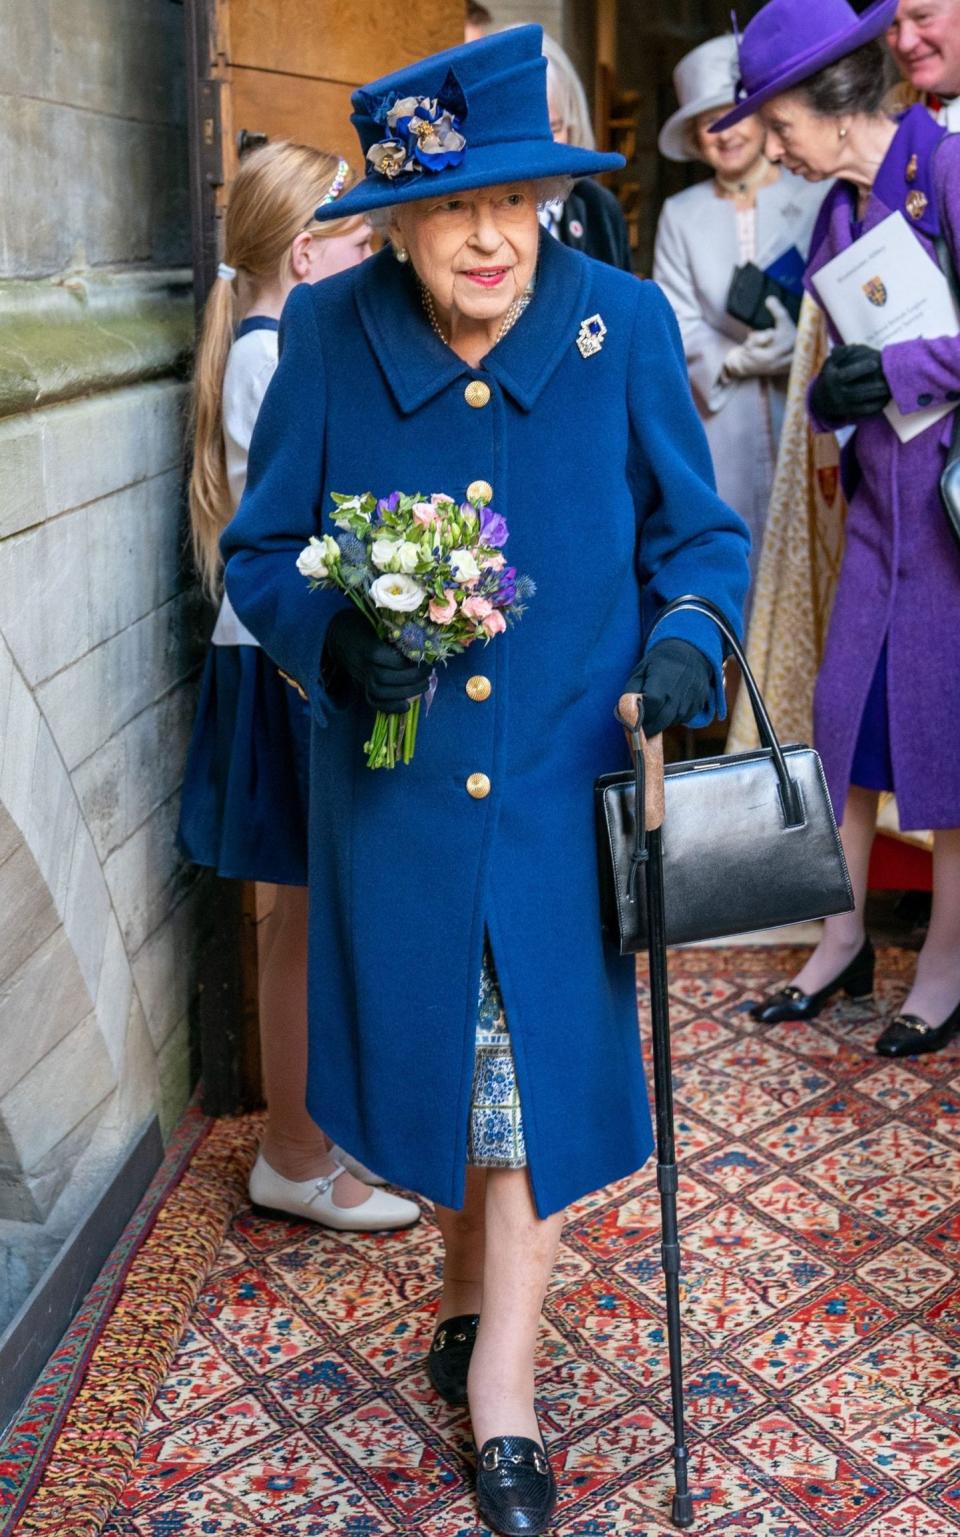 The Queen used a walking stick for comfort when attending an event at Westminster Abbey - Arthur Edwards/The Sun/PA Wire